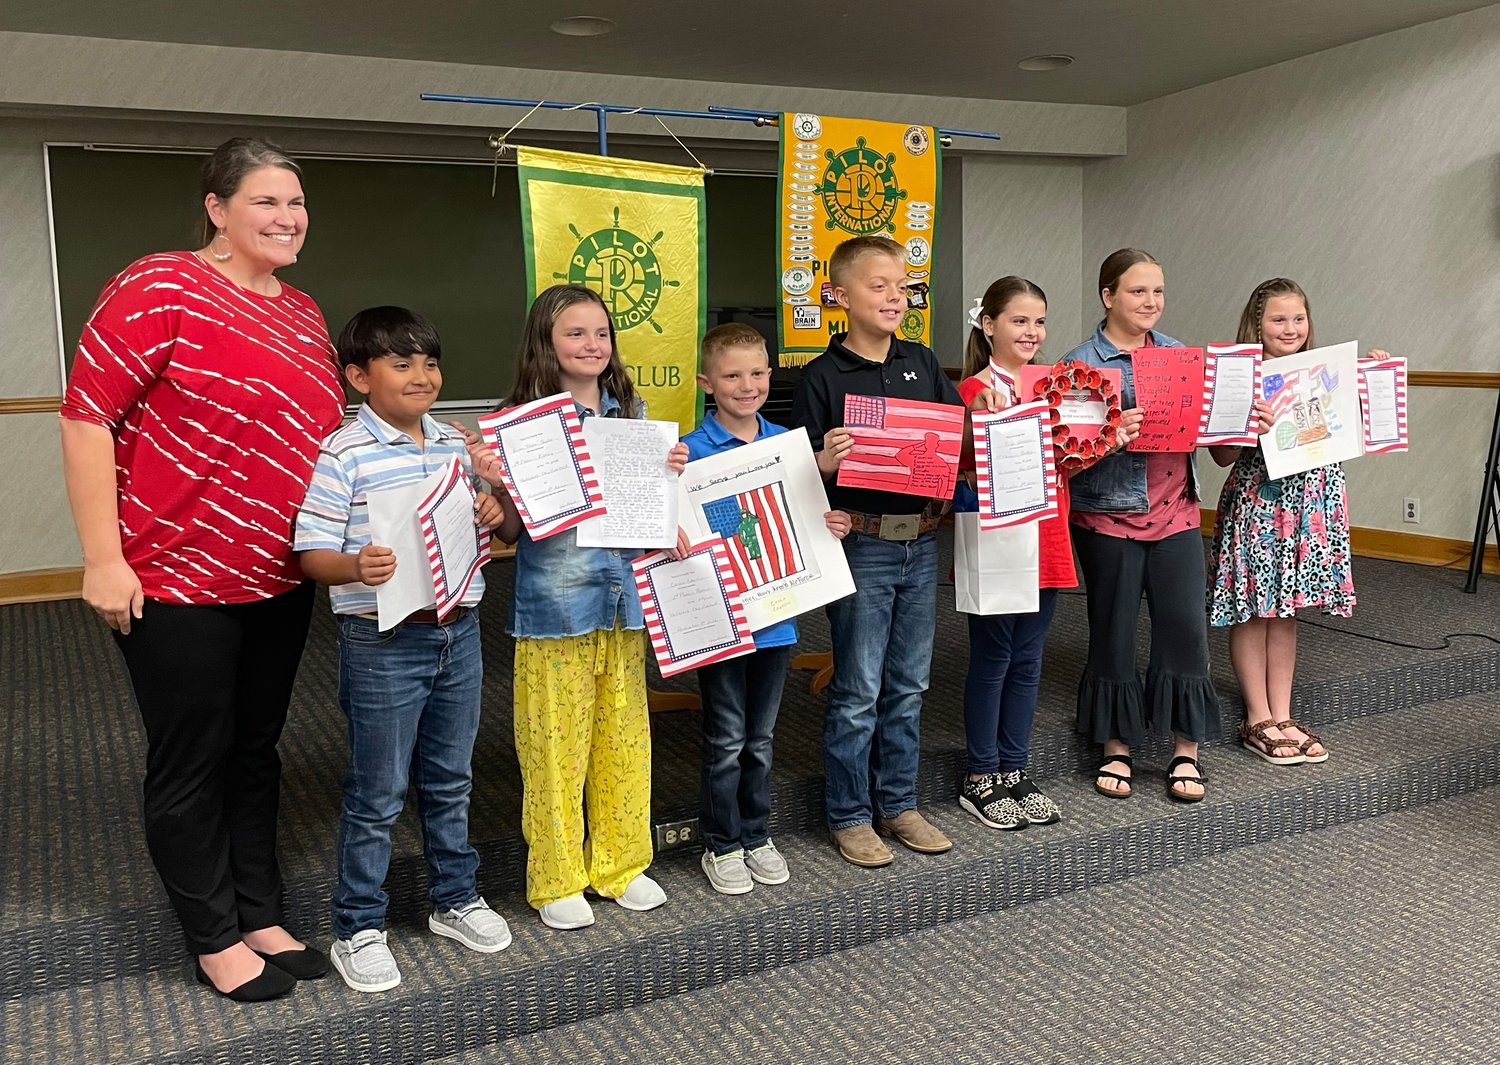 Mineola Elementary Principal Brittany Thompson is shown with winners of the Mineola Pilot Club’s patriotic contest, Levi Palma, Emma “Cavin” Taylor, Casen Chaffin, Kinsler Bowker, Emory Foster, Sandra Monrroe Gonzalez and Brooklyn Hall. Not pictured are Amadeo Paredes, Bentey Bates and Tripp Goodson.